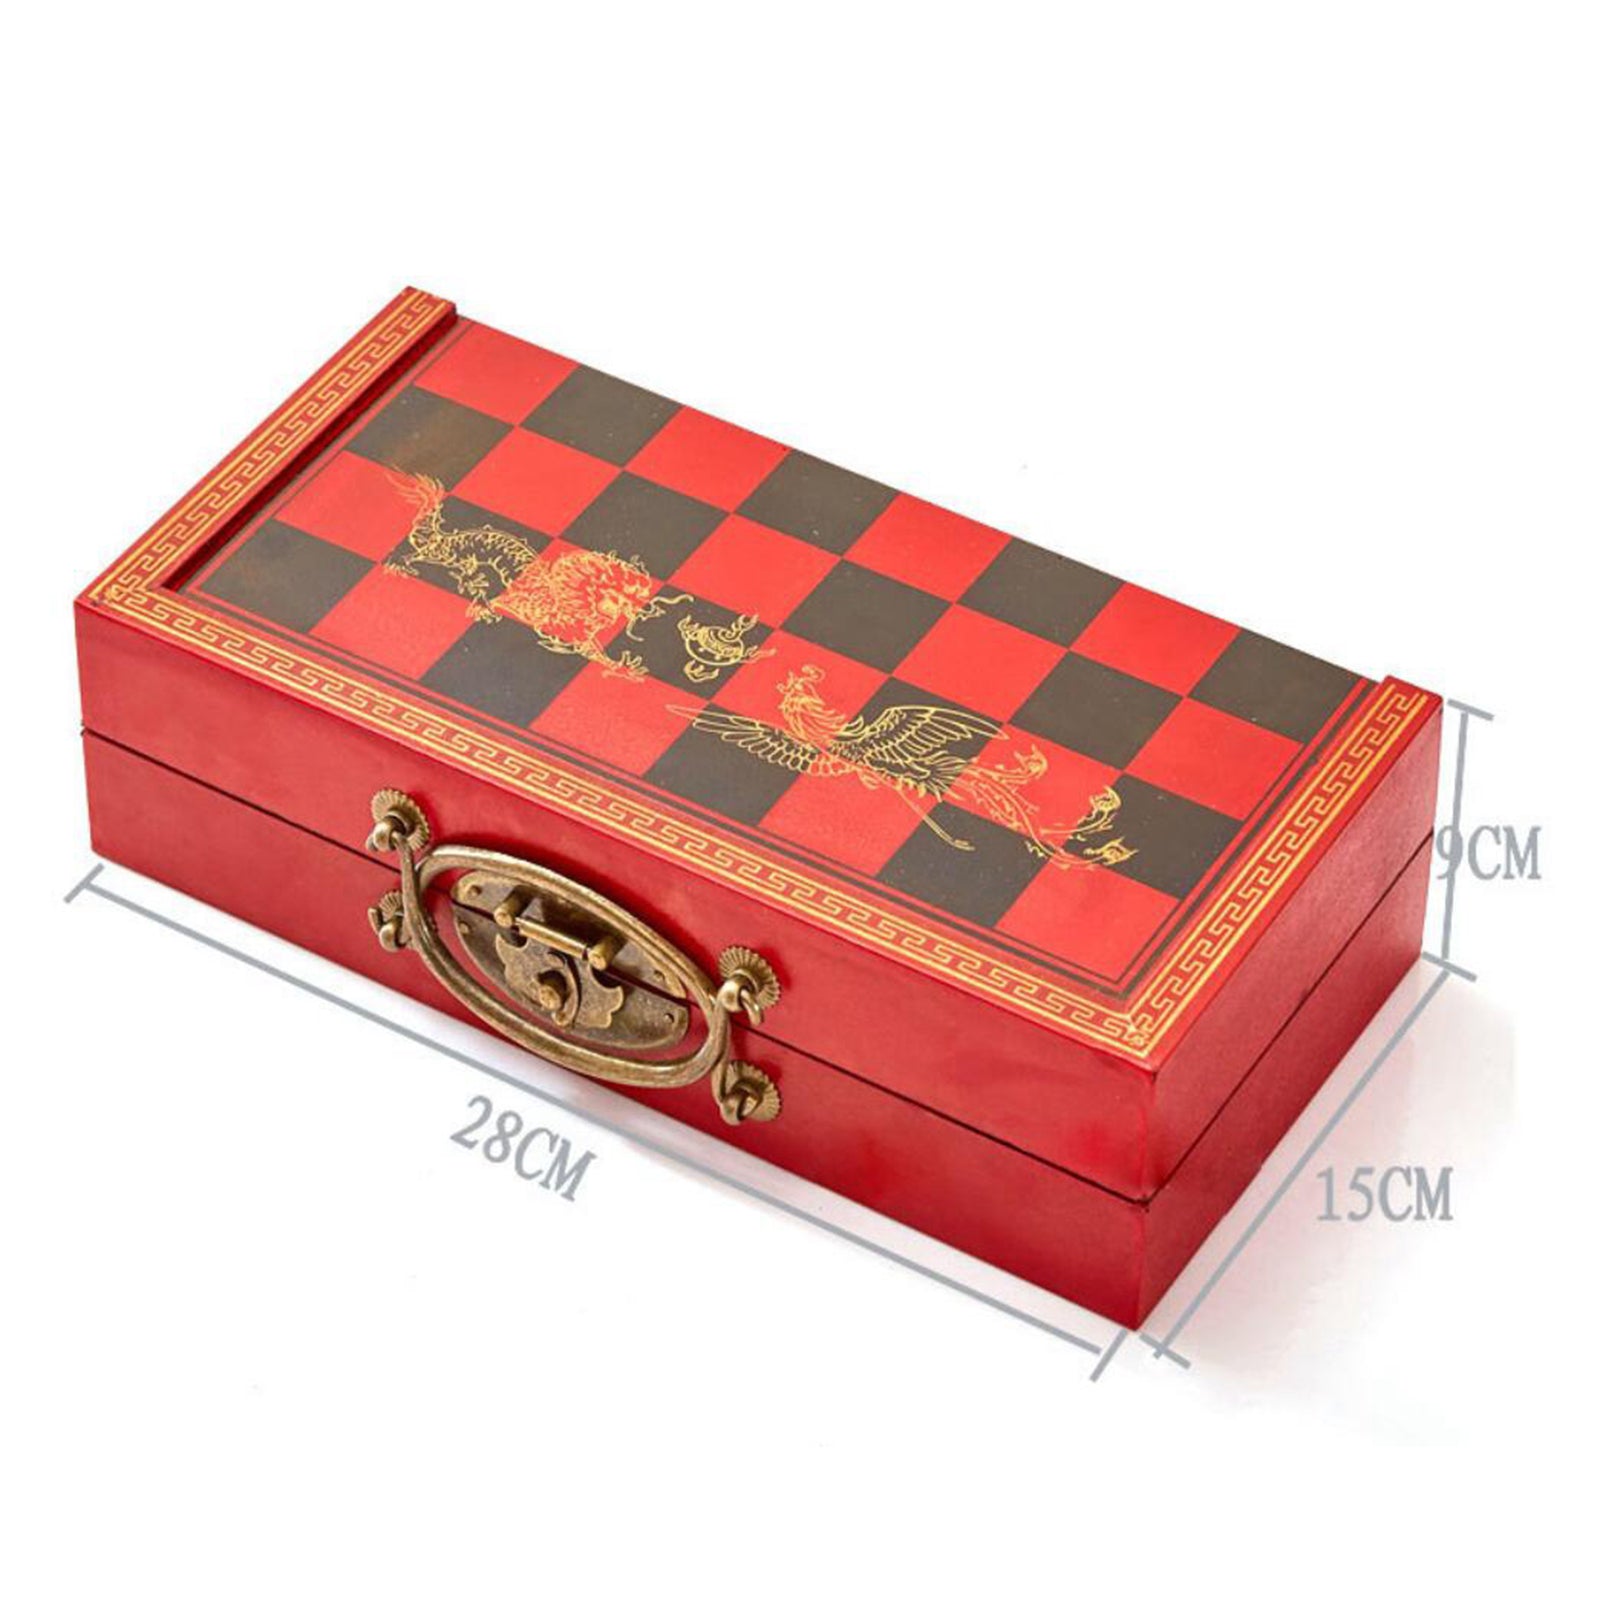 New 28x28cm Standard Game Vintage Wooden Chess Set Foldable Board Great Gift